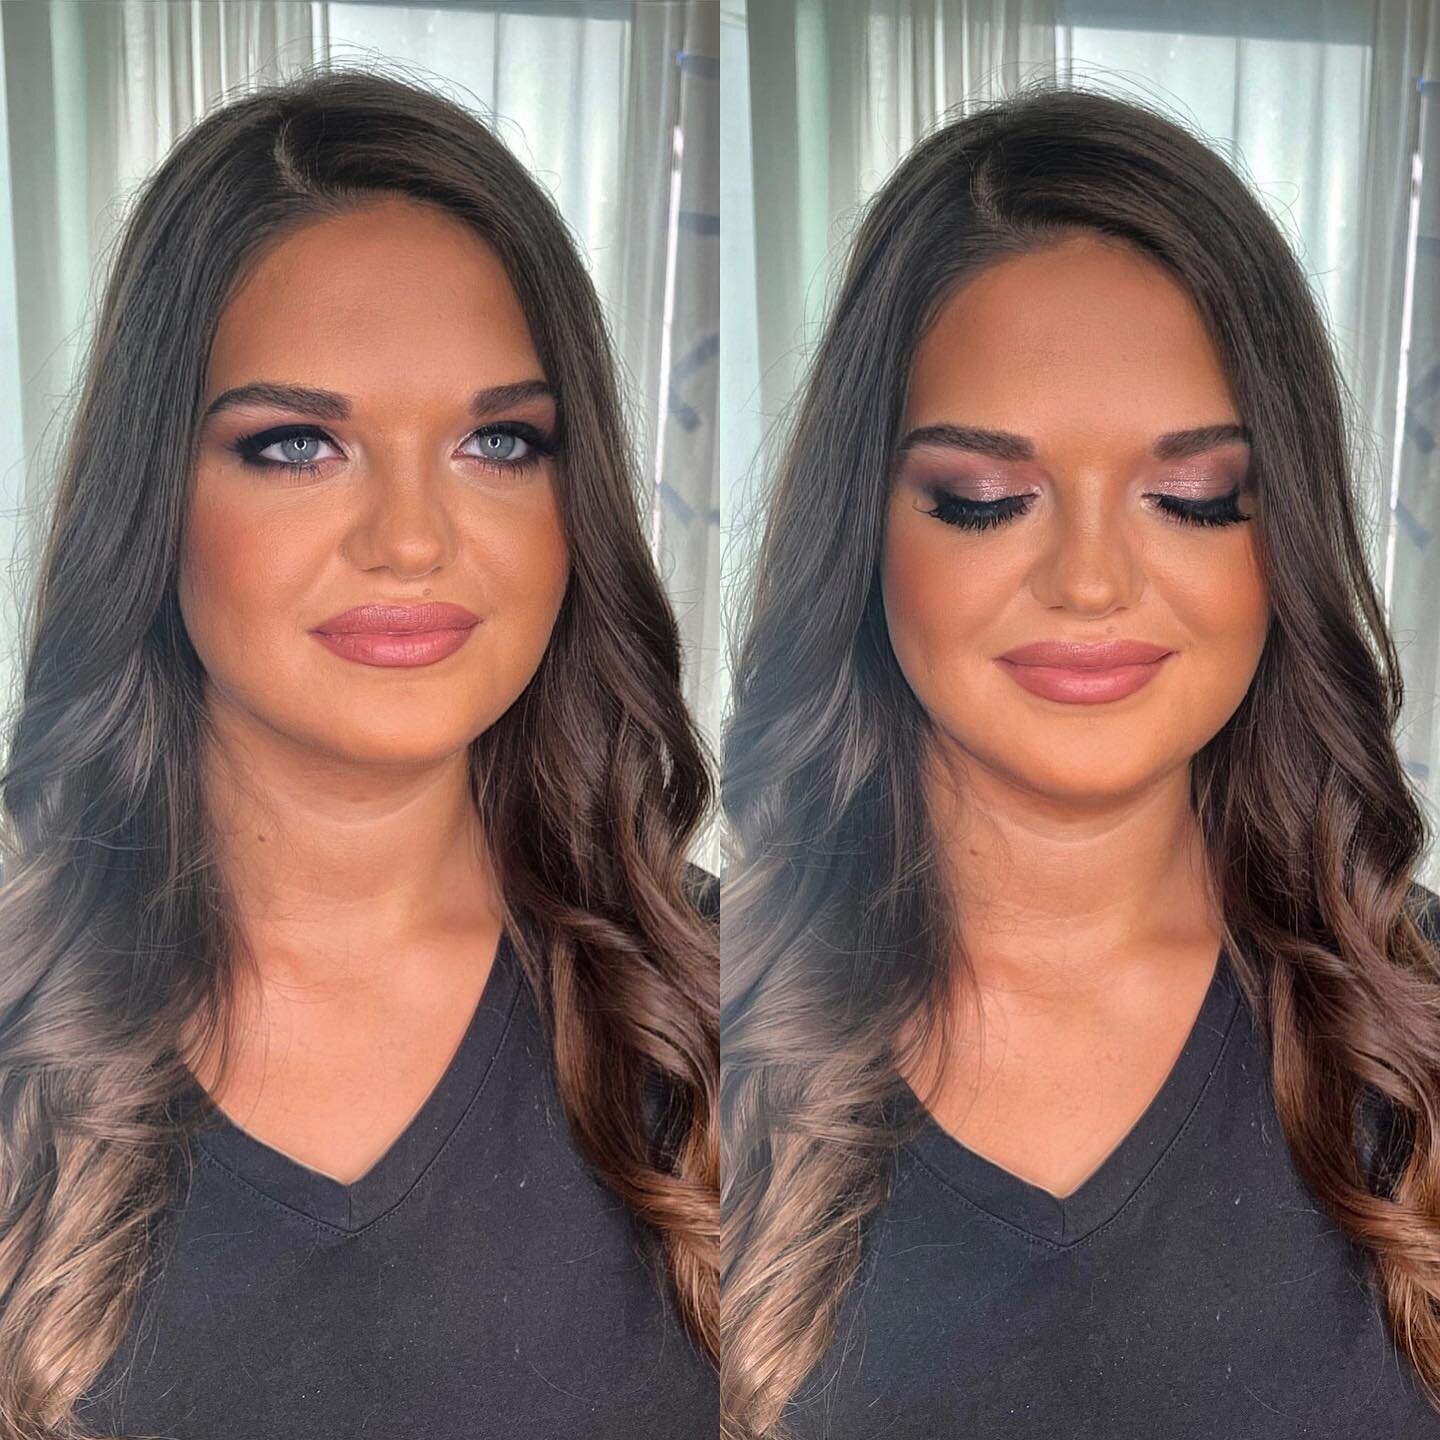 This bombshell came in a few days ago &amp; I debated posting because the lighting was super off in these pics but how could I not?! 

✨Obsessed✨ is an understatement!